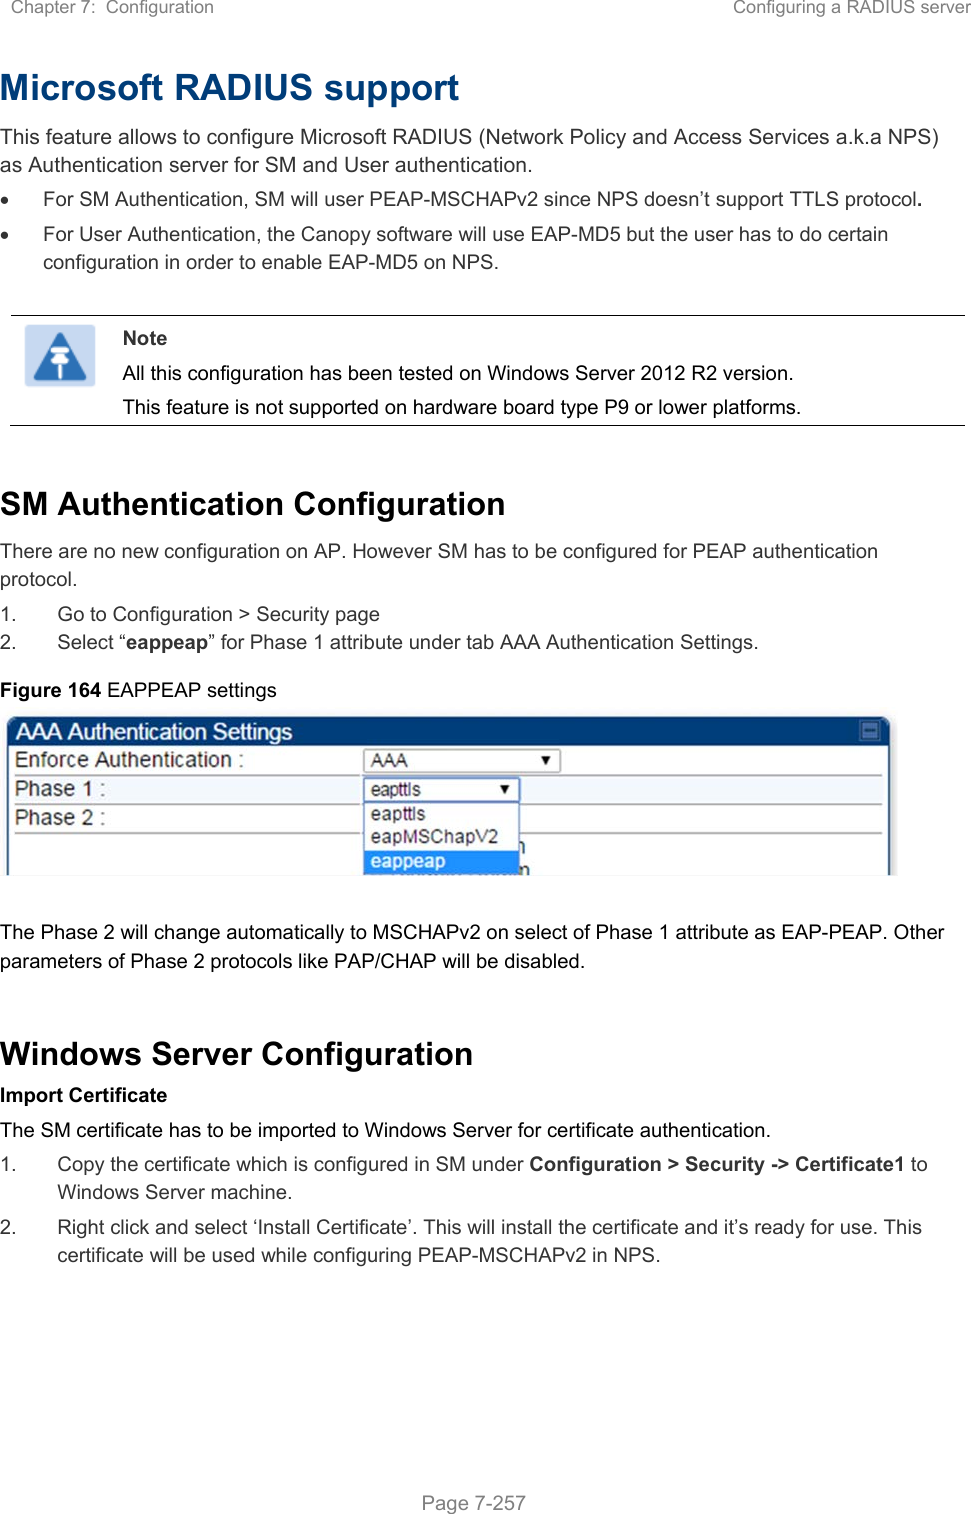 Chapter 7:  Configuration  Configuring a RADIUS server   Page 7-257 Microsoft RADIUS support This feature allows to configure Microsoft RADIUS (Network Policy and Access Services a.k.a NPS) as Authentication server for SM and User authentication.   For SM Authentication, SM will user PEAP-MSCHAPv2 since NPS doesn’t support TTLS protocol.   For User Authentication, the Canopy software will use EAP-MD5 but the user has to do certain configuration in order to enable EAP-MD5 on NPS.   Note All this configuration has been tested on Windows Server 2012 R2 version. This feature is not supported on hardware board type P9 or lower platforms.  SM Authentication Configuration There are no new configuration on AP. However SM has to be configured for PEAP authentication protocol. 1.  Go to Configuration &gt; Security page 2.  Select “eappeap” for Phase 1 attribute under tab AAA Authentication Settings.  Figure 164 EAPPEAP settings     The Phase 2 will change automatically to MSCHAPv2 on select of Phase 1 attribute as EAP-PEAP. Other parameters of Phase 2 protocols like PAP/CHAP will be disabled.  Windows Server Configuration Import Certificate The SM certificate has to be imported to Windows Server for certificate authentication. 1.  Copy the certificate which is configured in SM under Configuration &gt; Security -&gt; Certificate1 to Windows Server machine. 2.  Right click and select ‘Install Certificate’. This will install the certificate and it’s ready for use. This certificate will be used while configuring PEAP-MSCHAPv2 in NPS.   